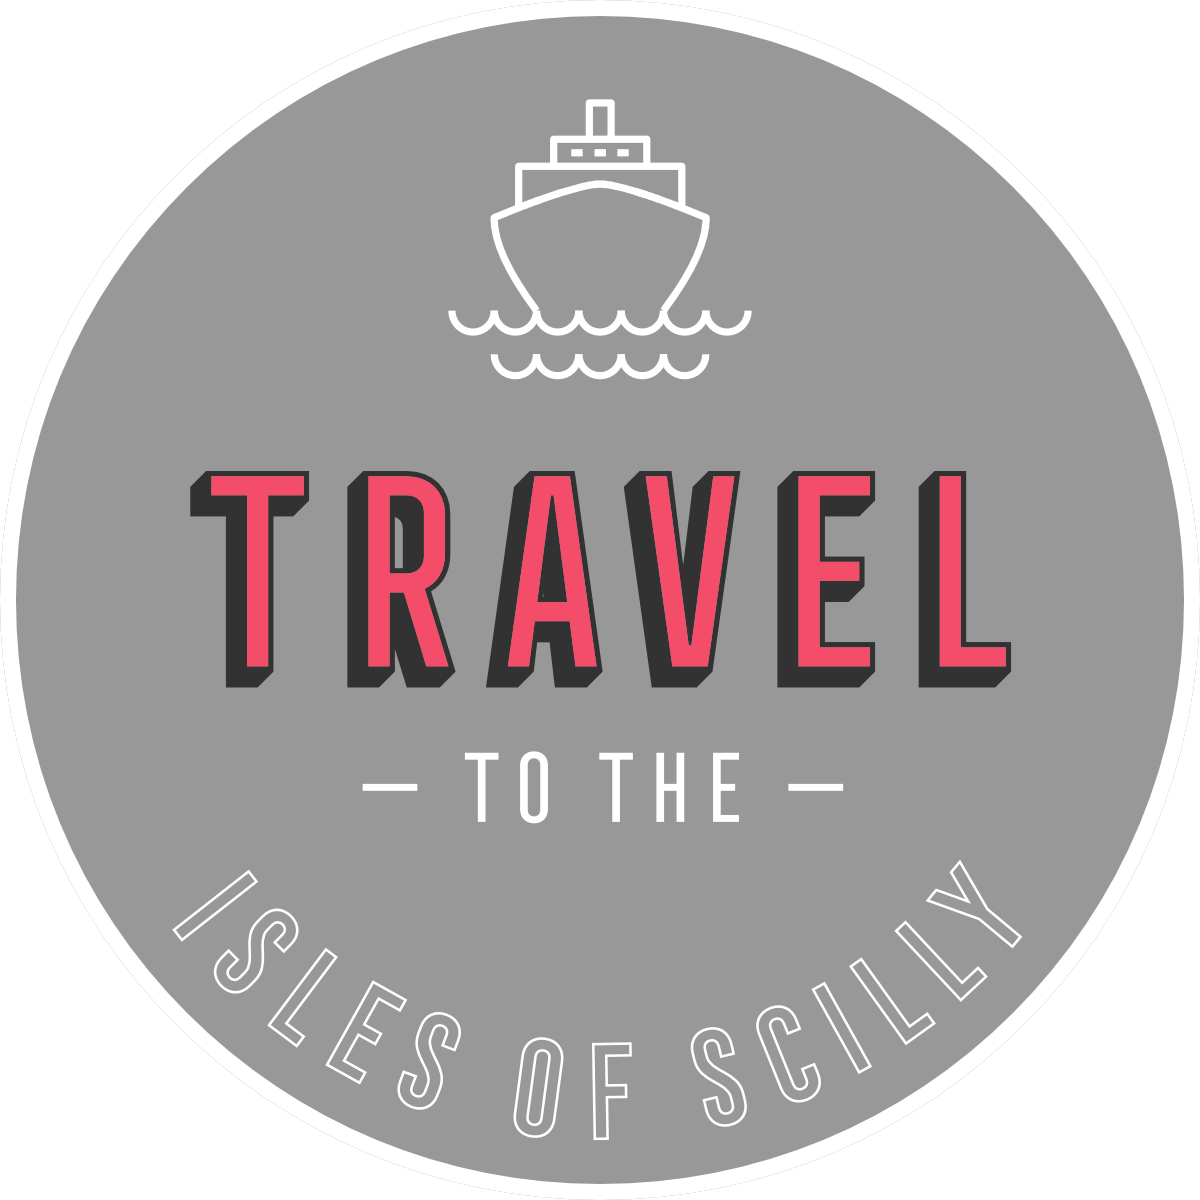 Travel to the Isles of Scilly